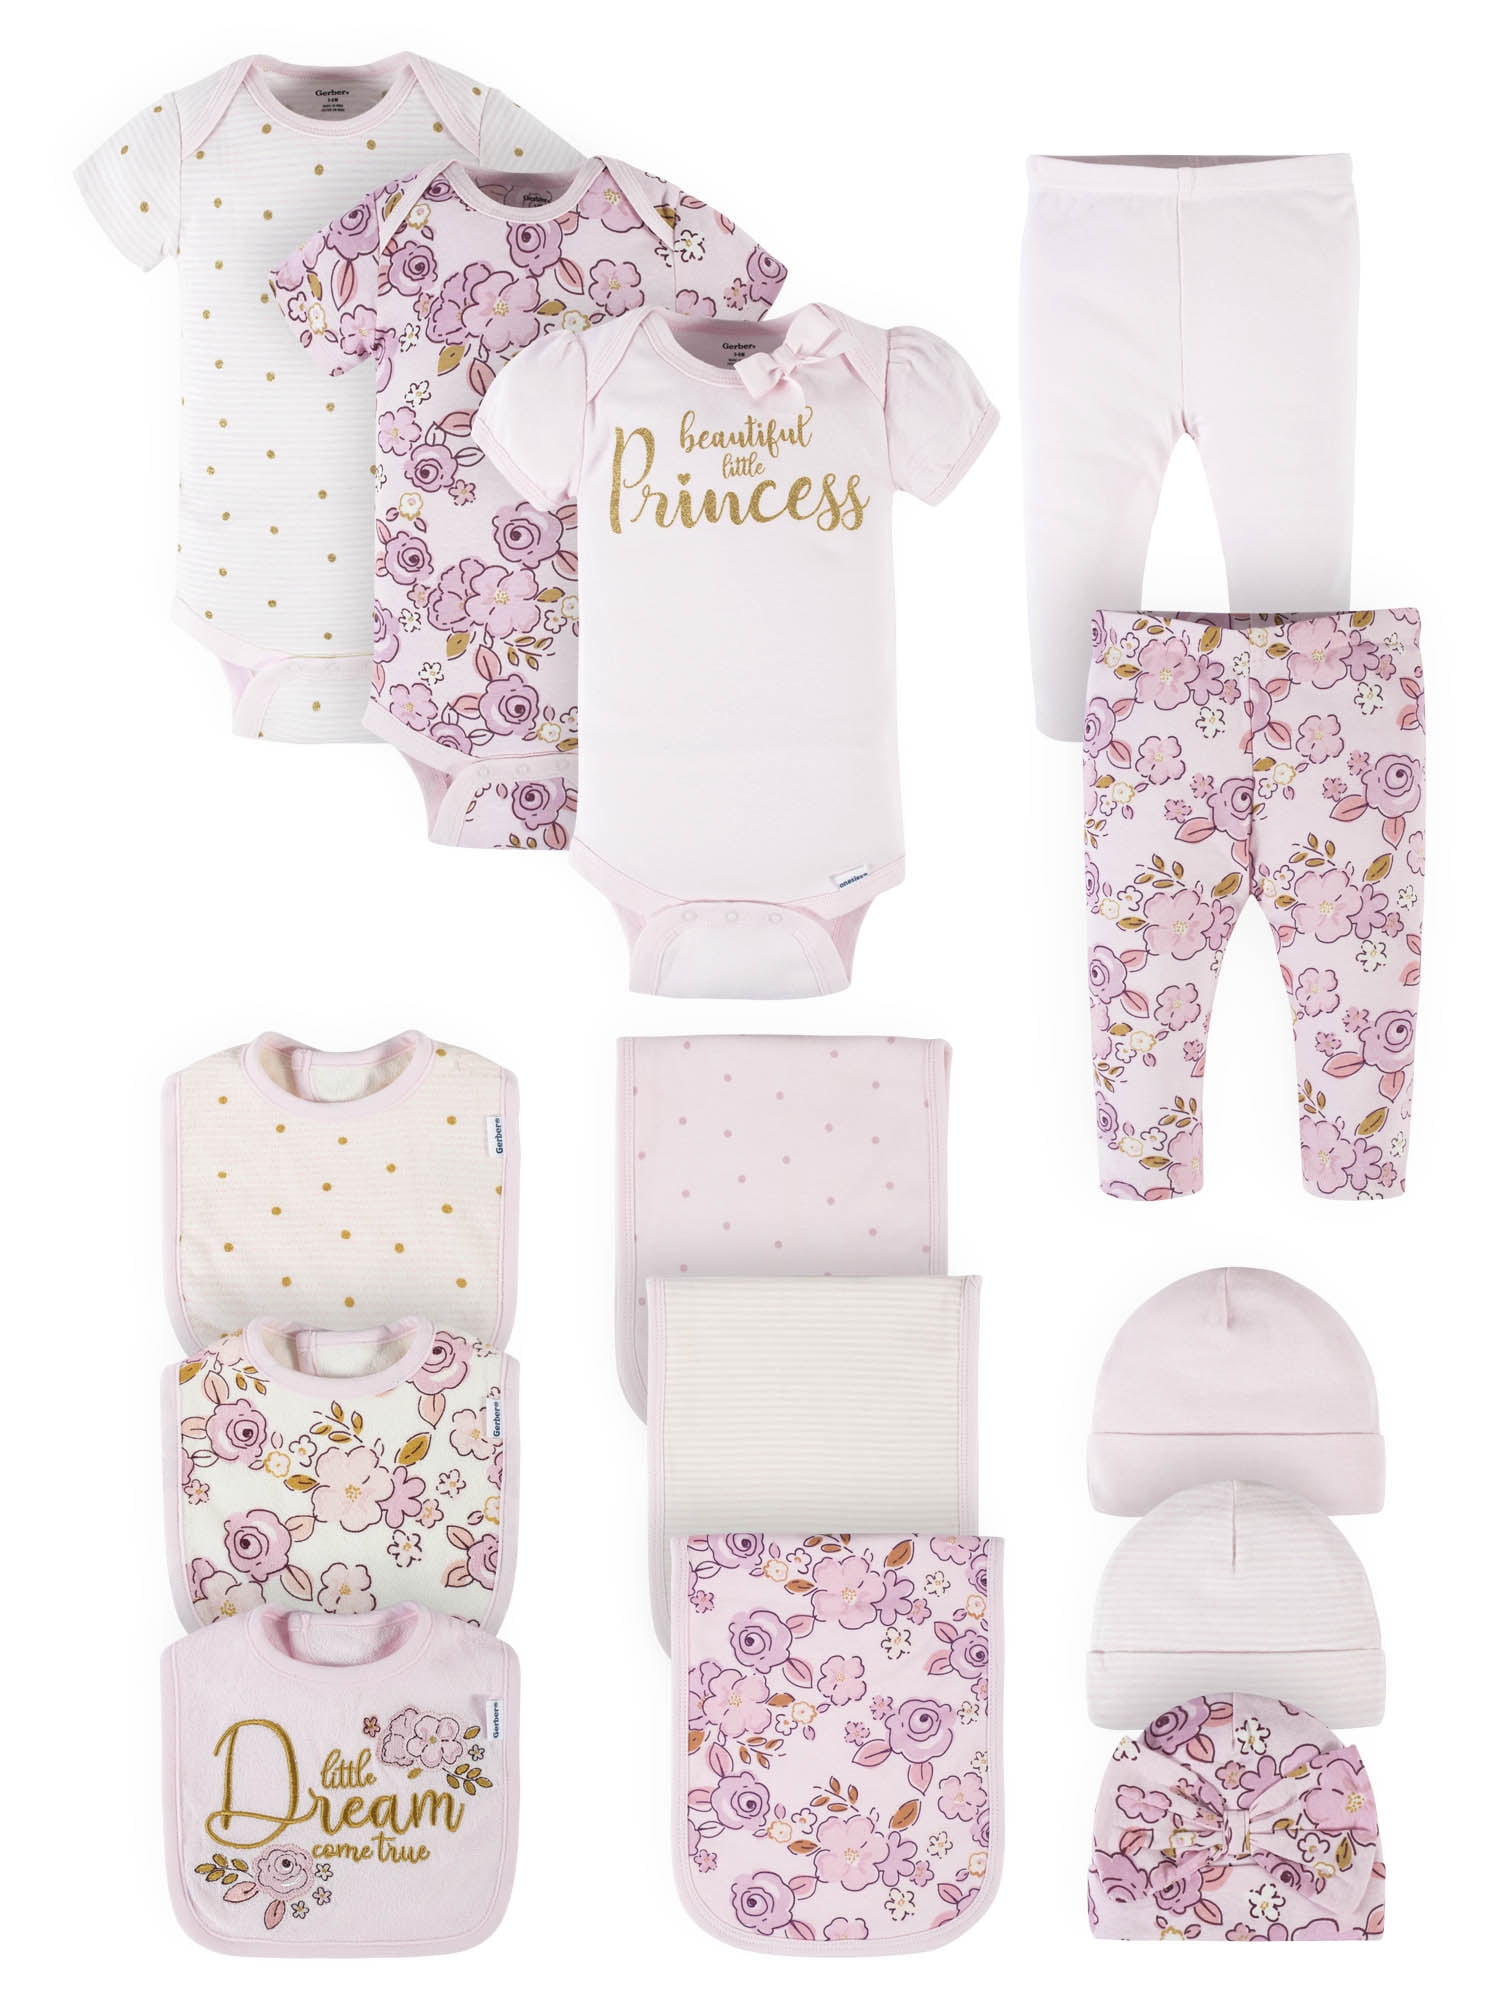 I. Introduction to DIY Baby Outfits